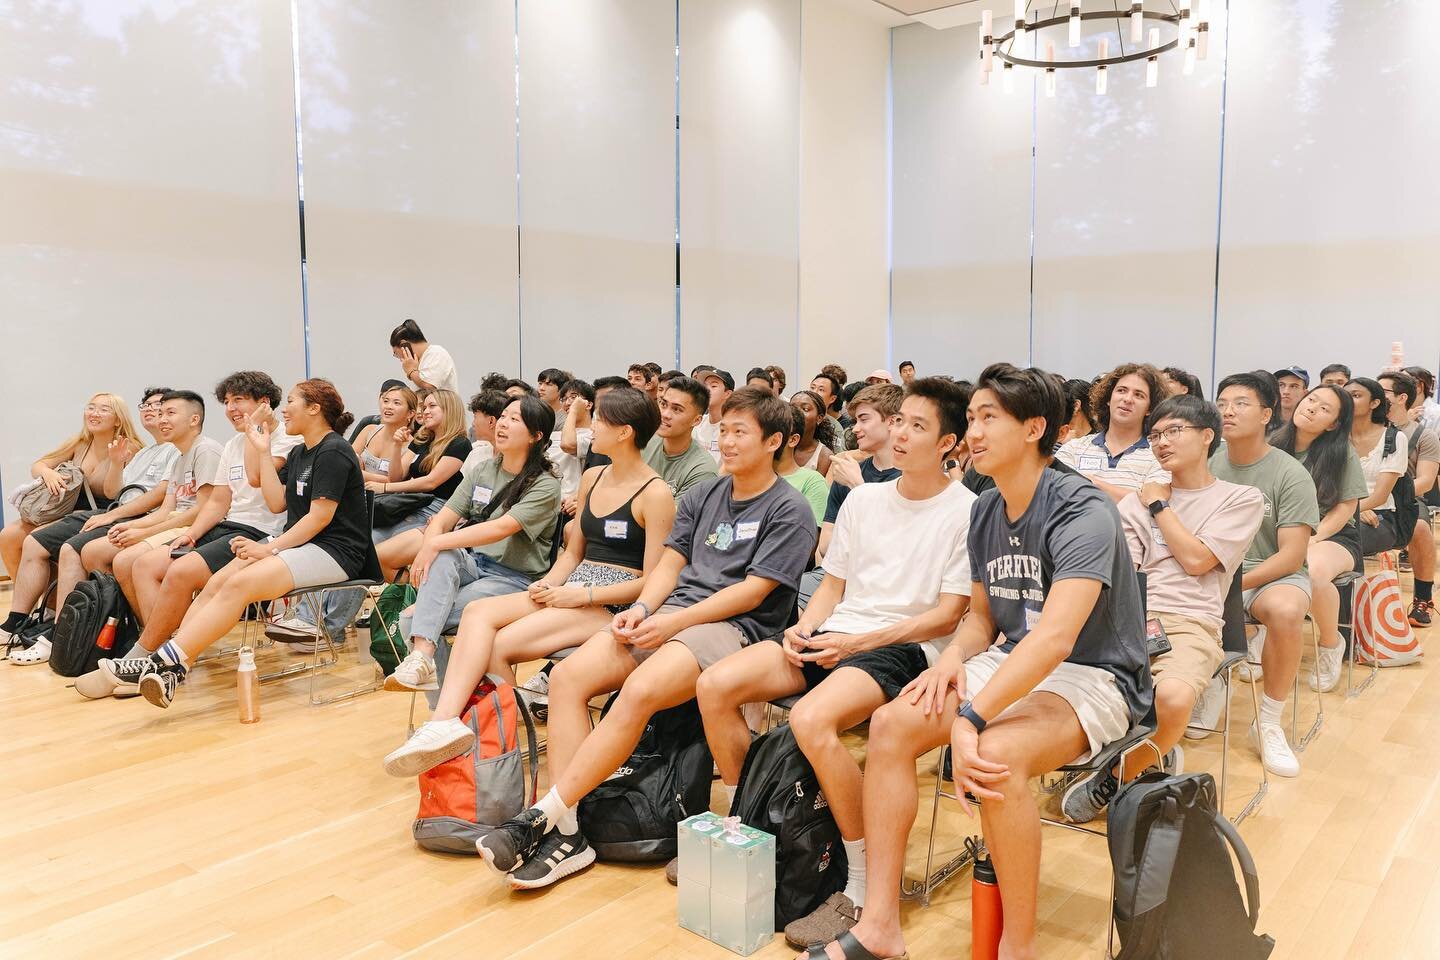 Glad many if you got to join us at 316 Collective&rsquo;s Launch Night 2023. 🙌🏼 What a Fun way to kickoff the school year together. Hope to see many of you around at our future bible studies and hangouts.